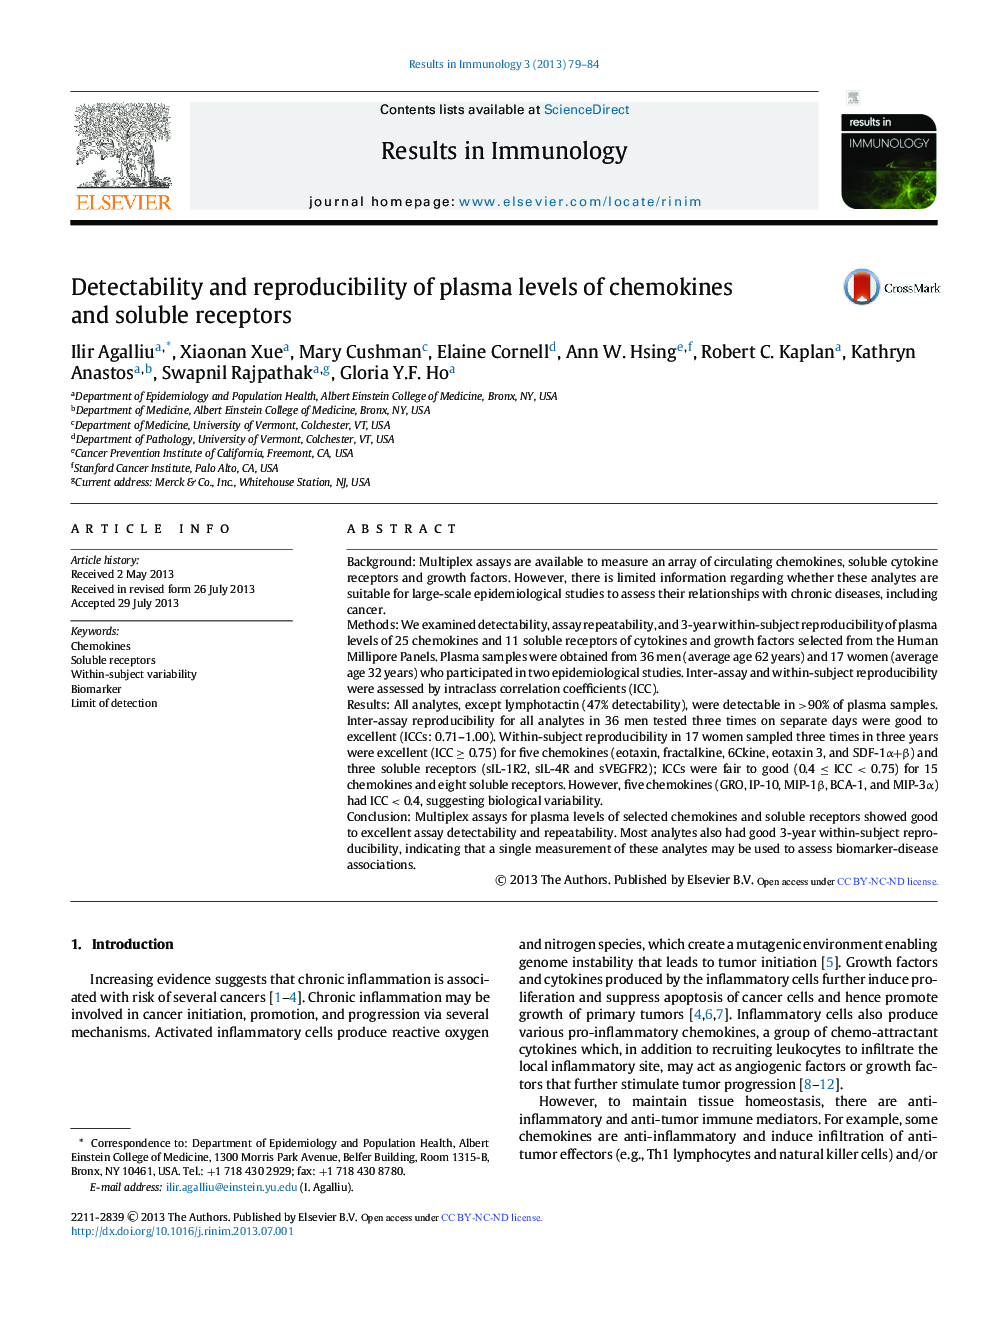 Detectability and reproducibility of plasma levels of chemokines and soluble receptors